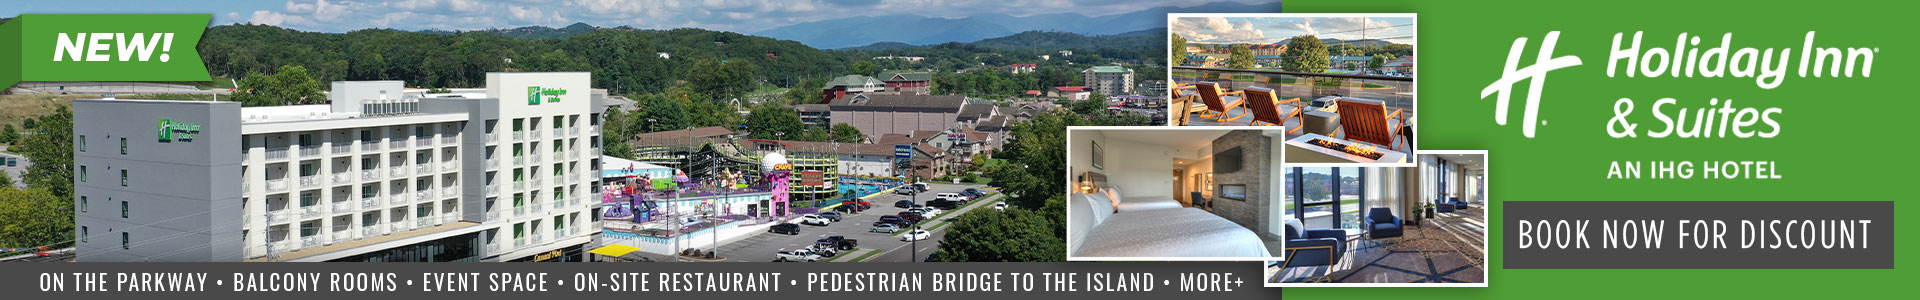 Ad - Holiday Inn & Suites Pigeon Forge Convention Center: Click to visit website.